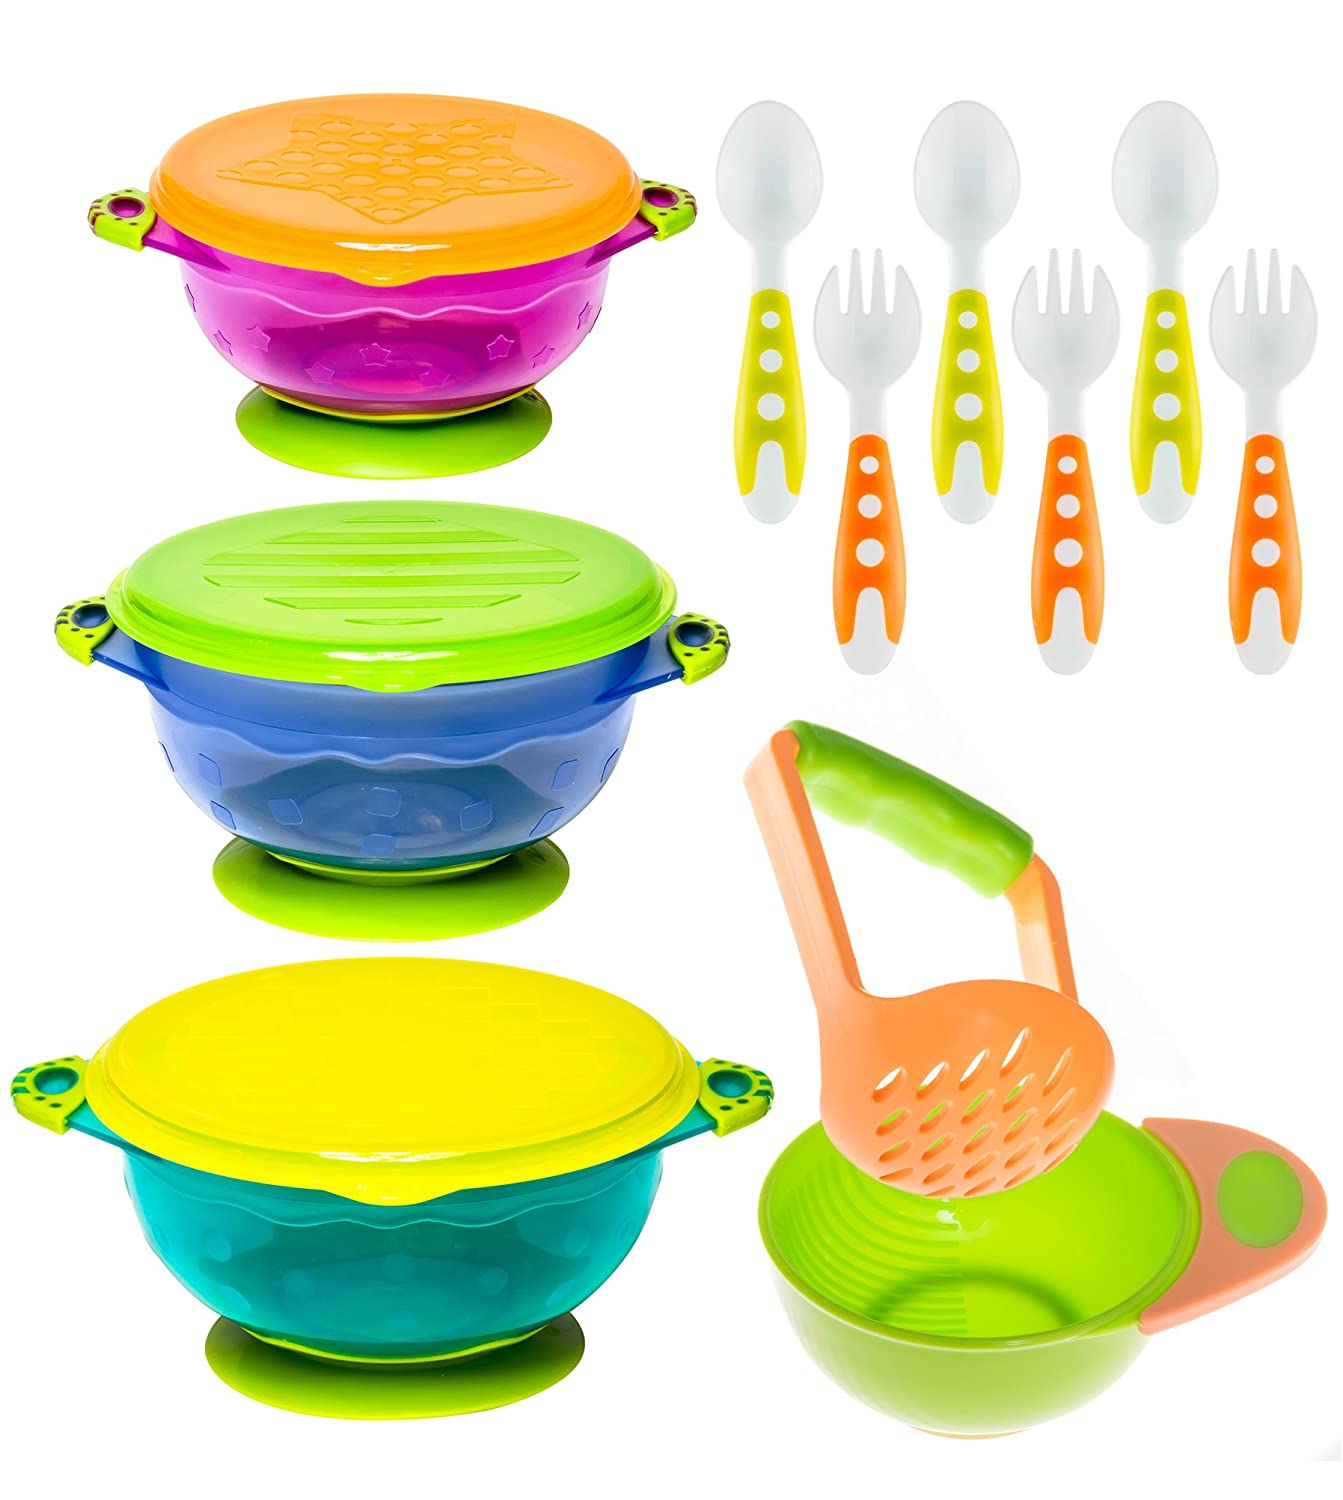 9 Best Baby Bowls and Plates 2022 - Buying Guide 2